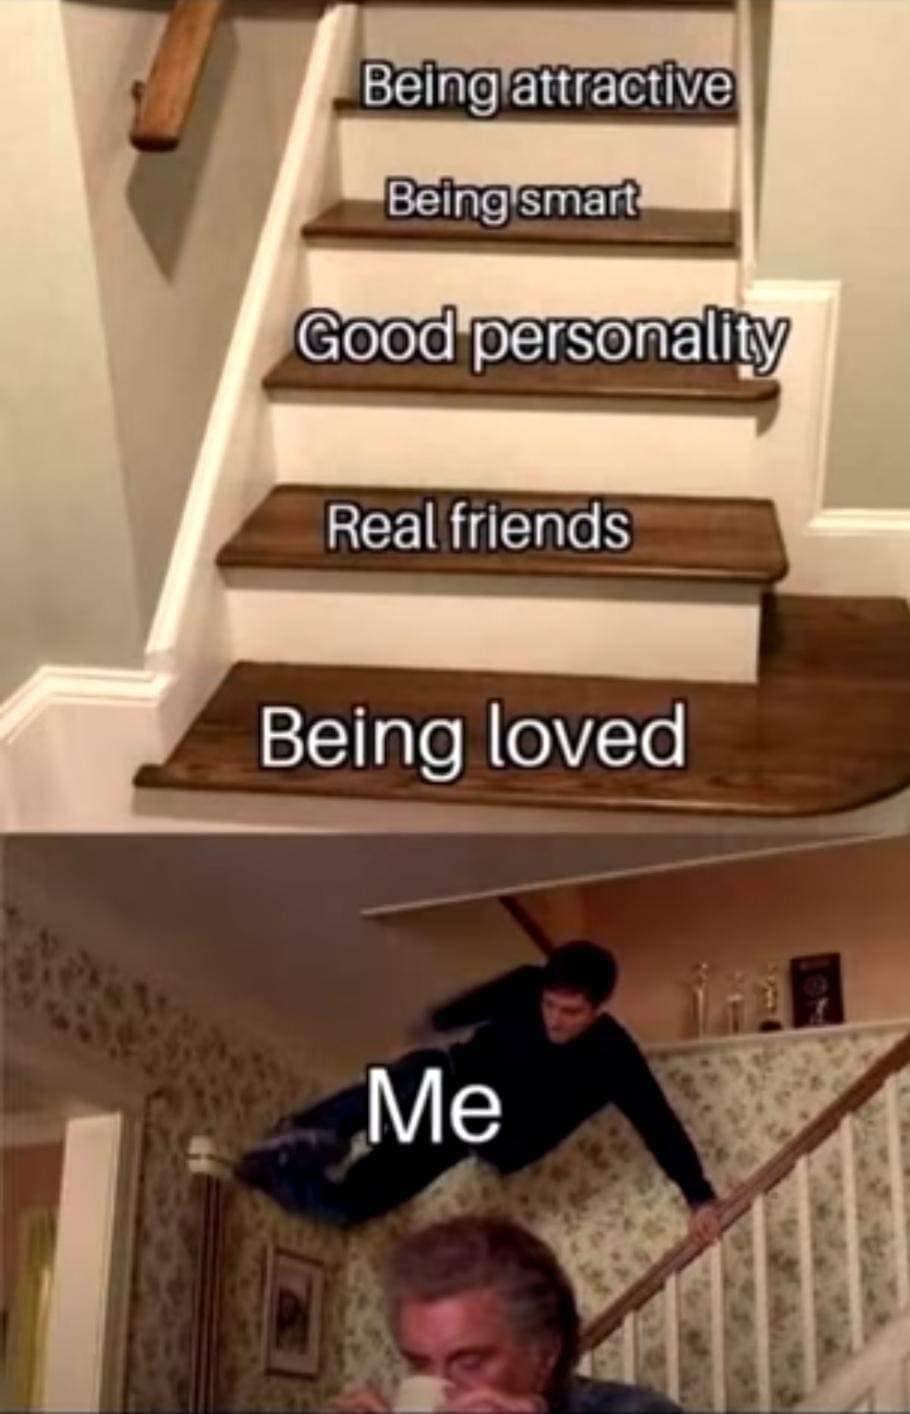 funny memes - dank memes - hardwood stairs - Being attractive Being smart Good personality Real friends Being loved Me